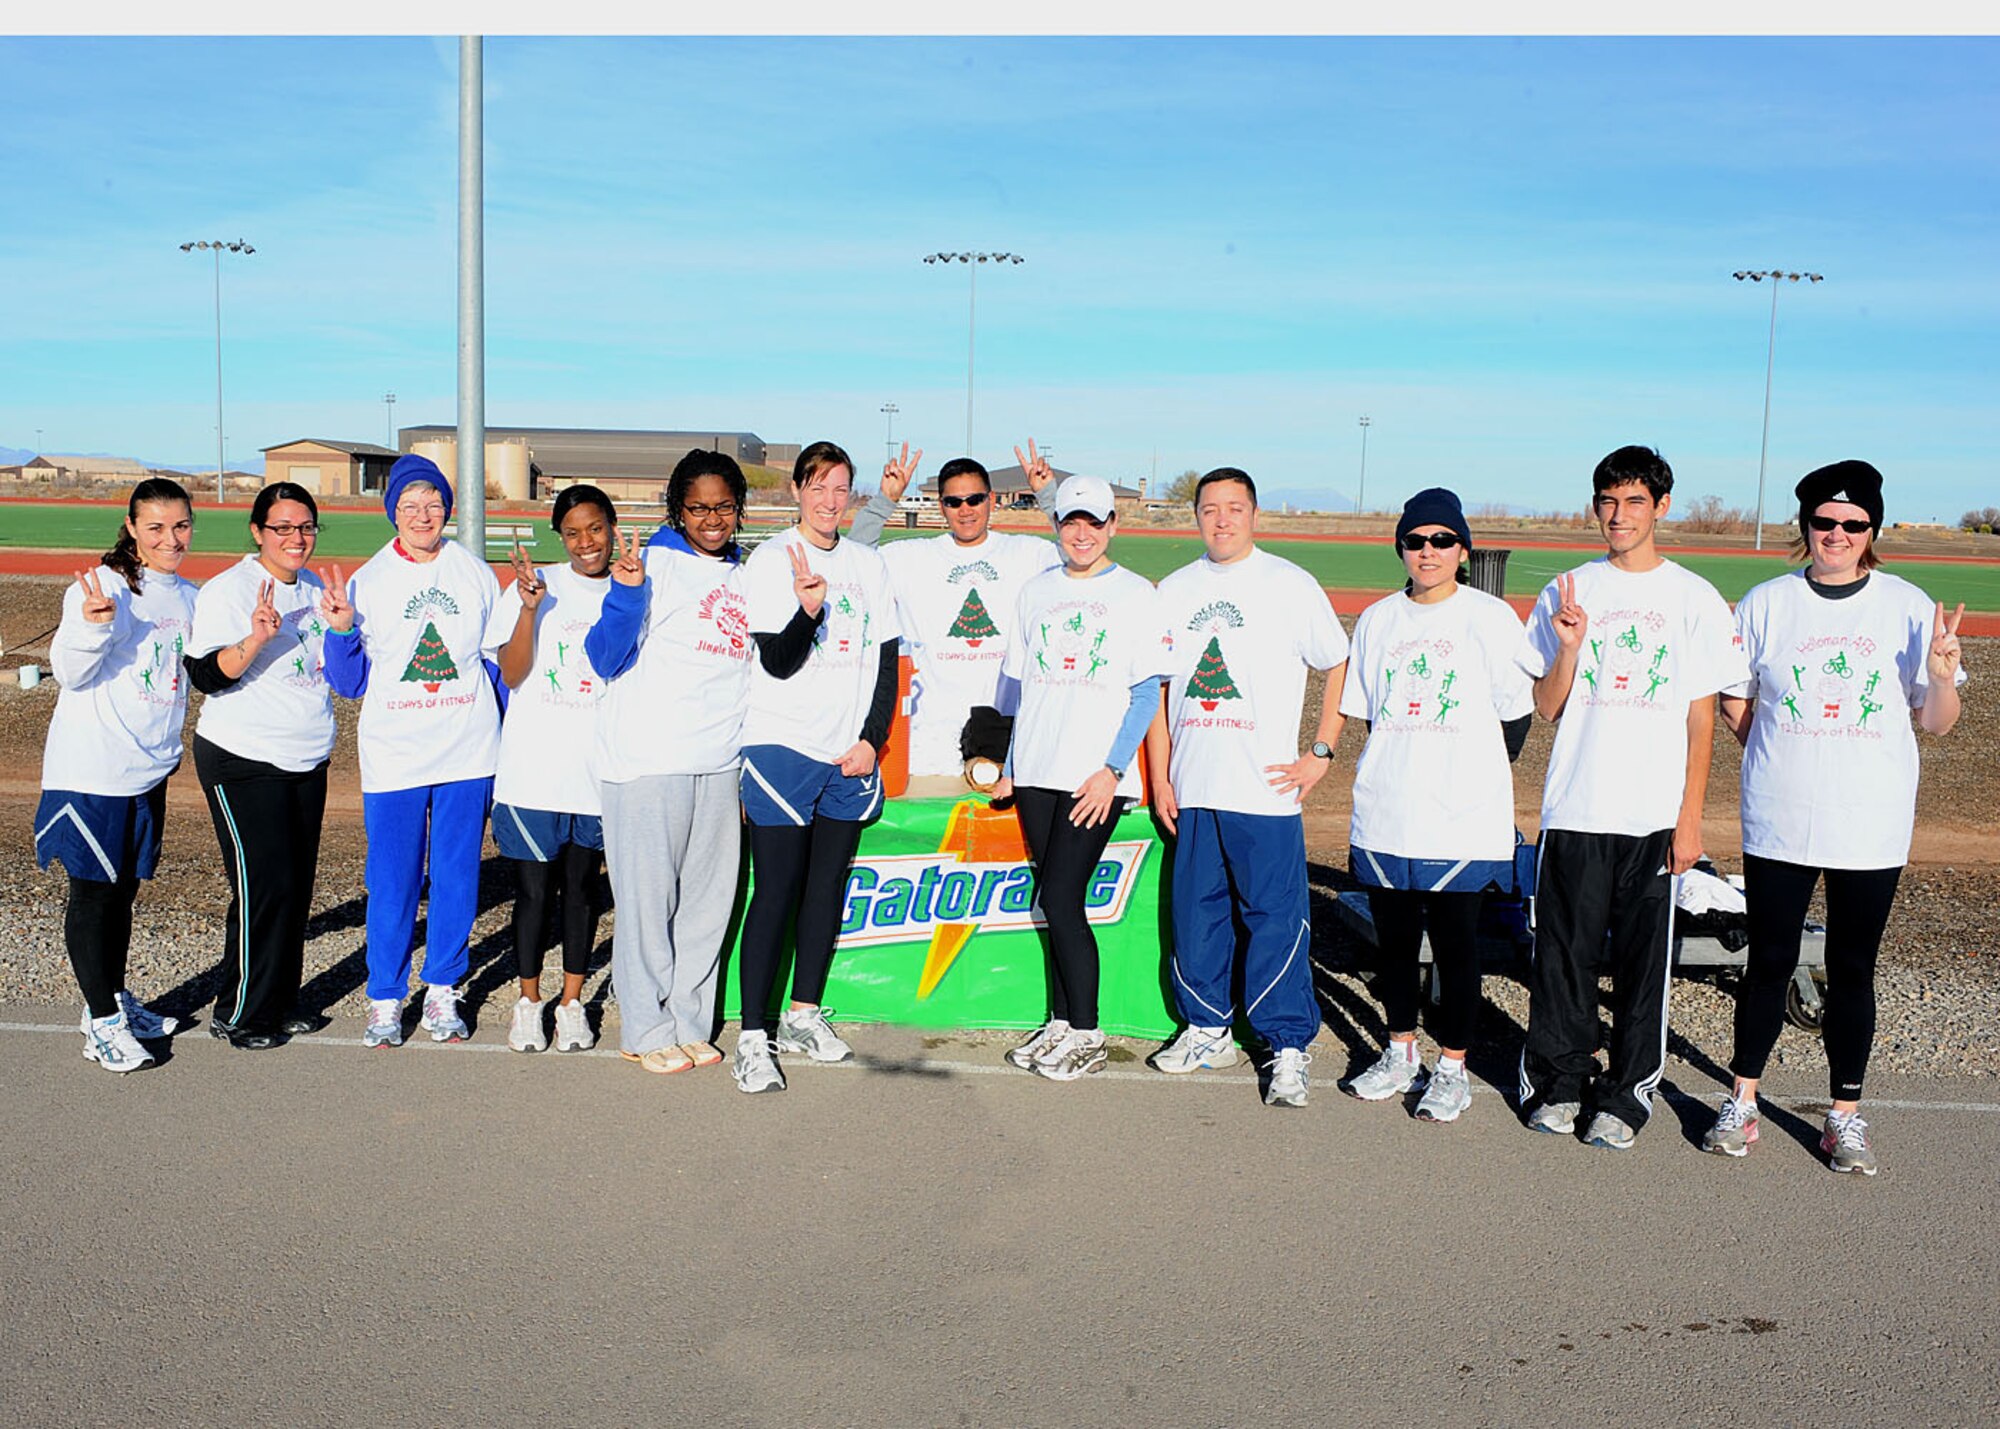 Participants in the Holloman Air Force Base, N.M., Frosty 5k run pose for a group picture at the Fitness and Sports Center track Dec. 19. The Frosty 5k run was the 12th and last run of 2008. (U.S Air Force photo/ Airman 1st Class DeAndre Curtiss)